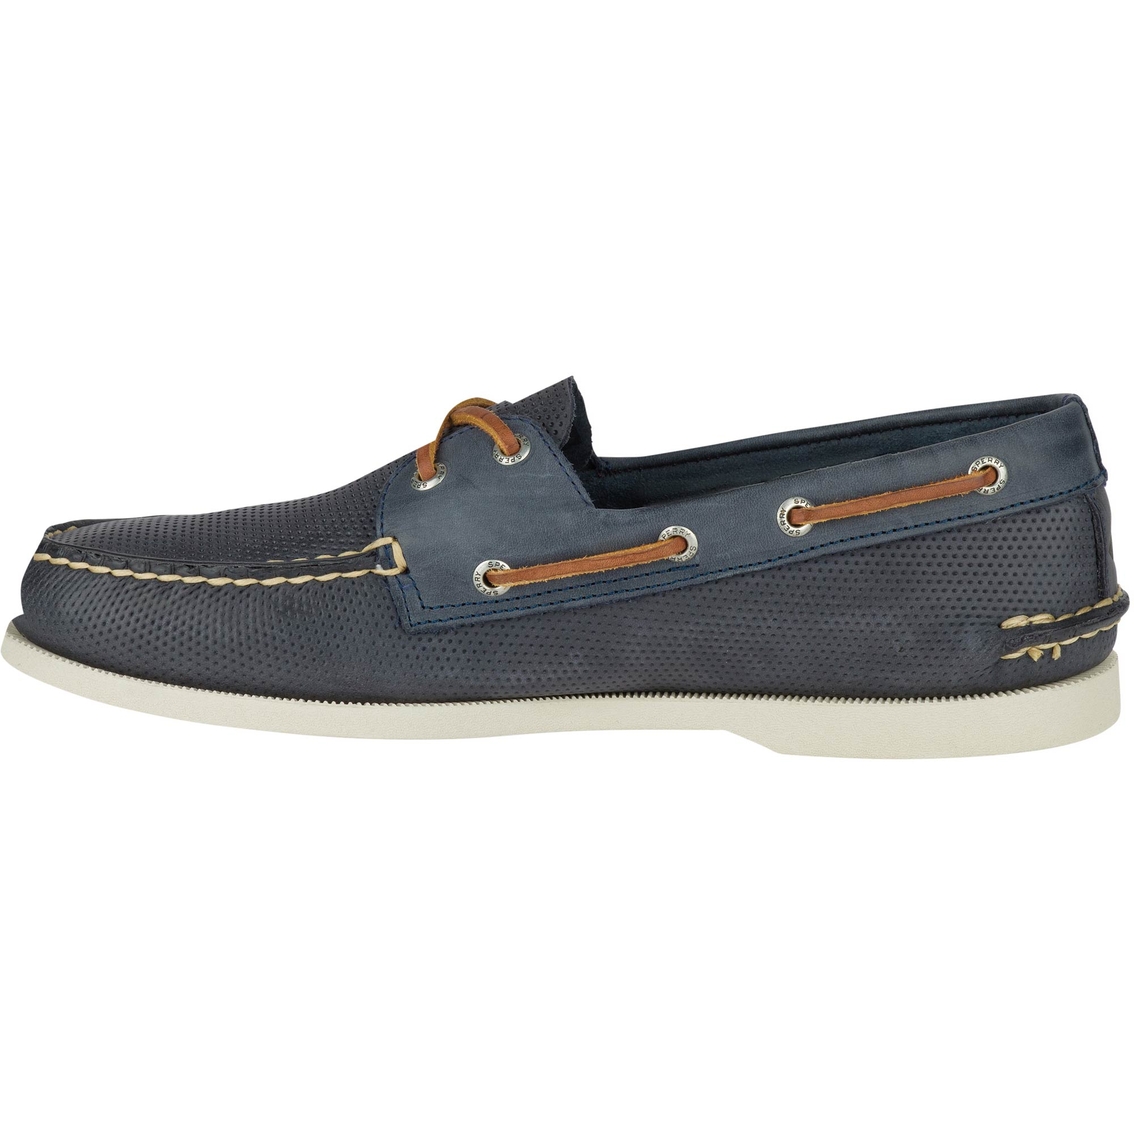 Sperry Authentic Original 2 Eye Perforated Boat Shoes | Casuals | Shoes ...